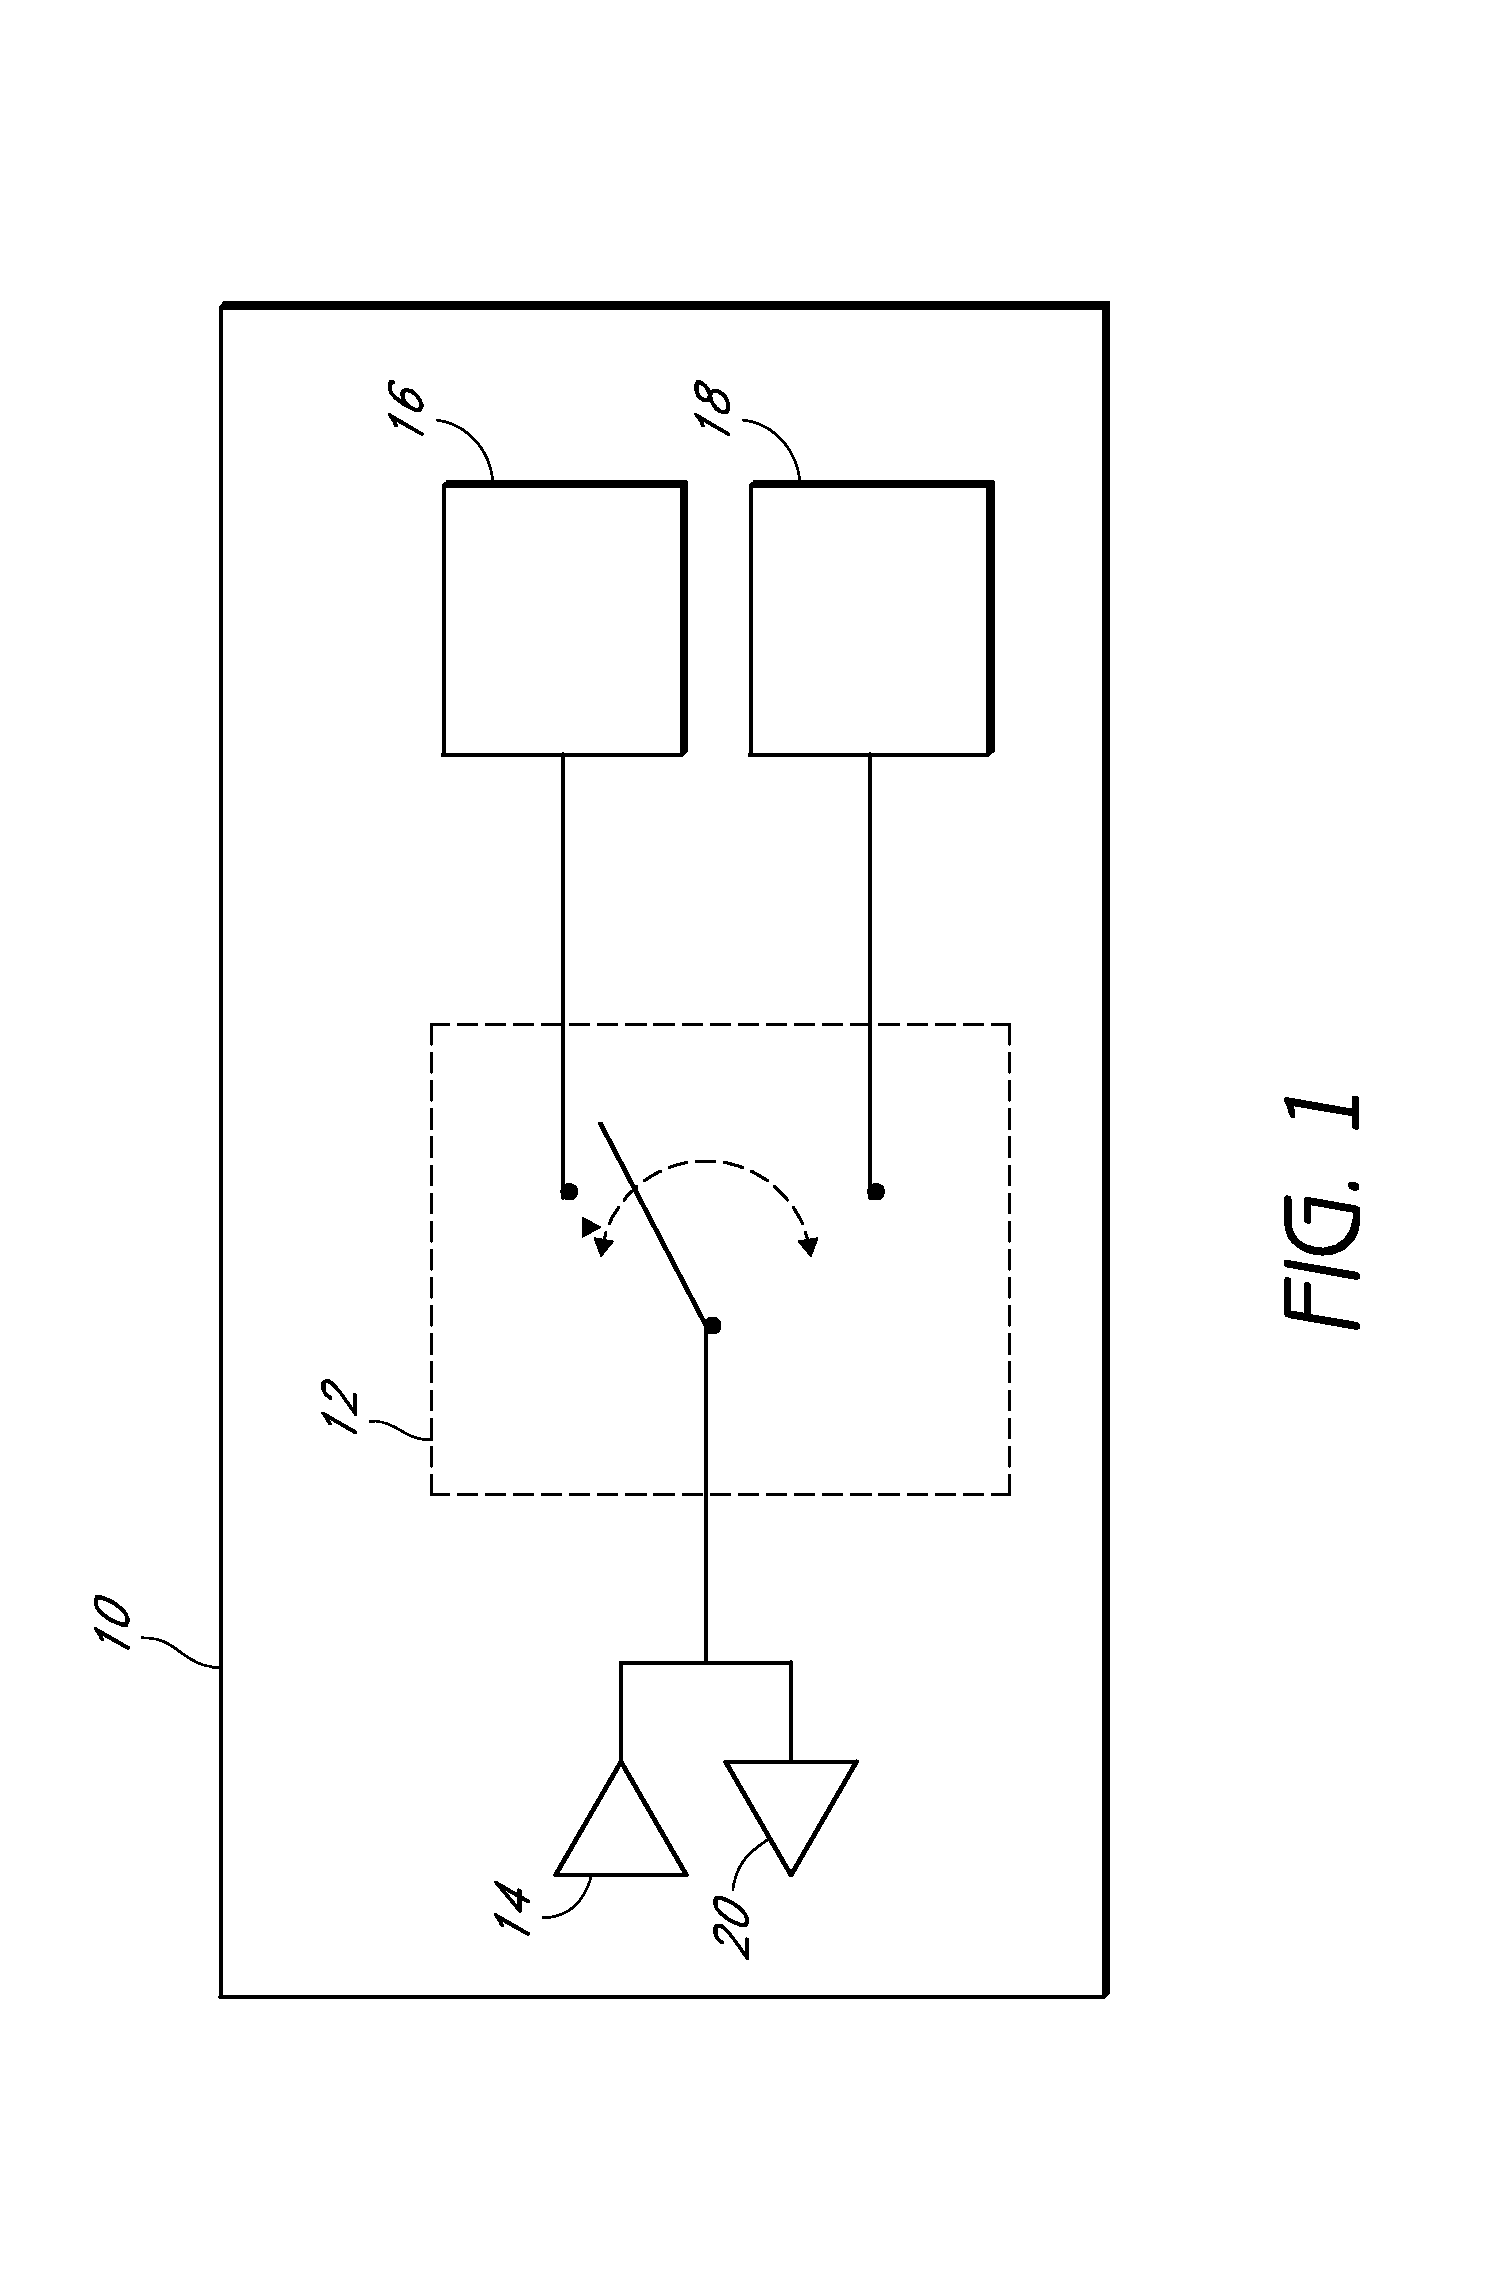 Circuit providing load isolation and noise reduction